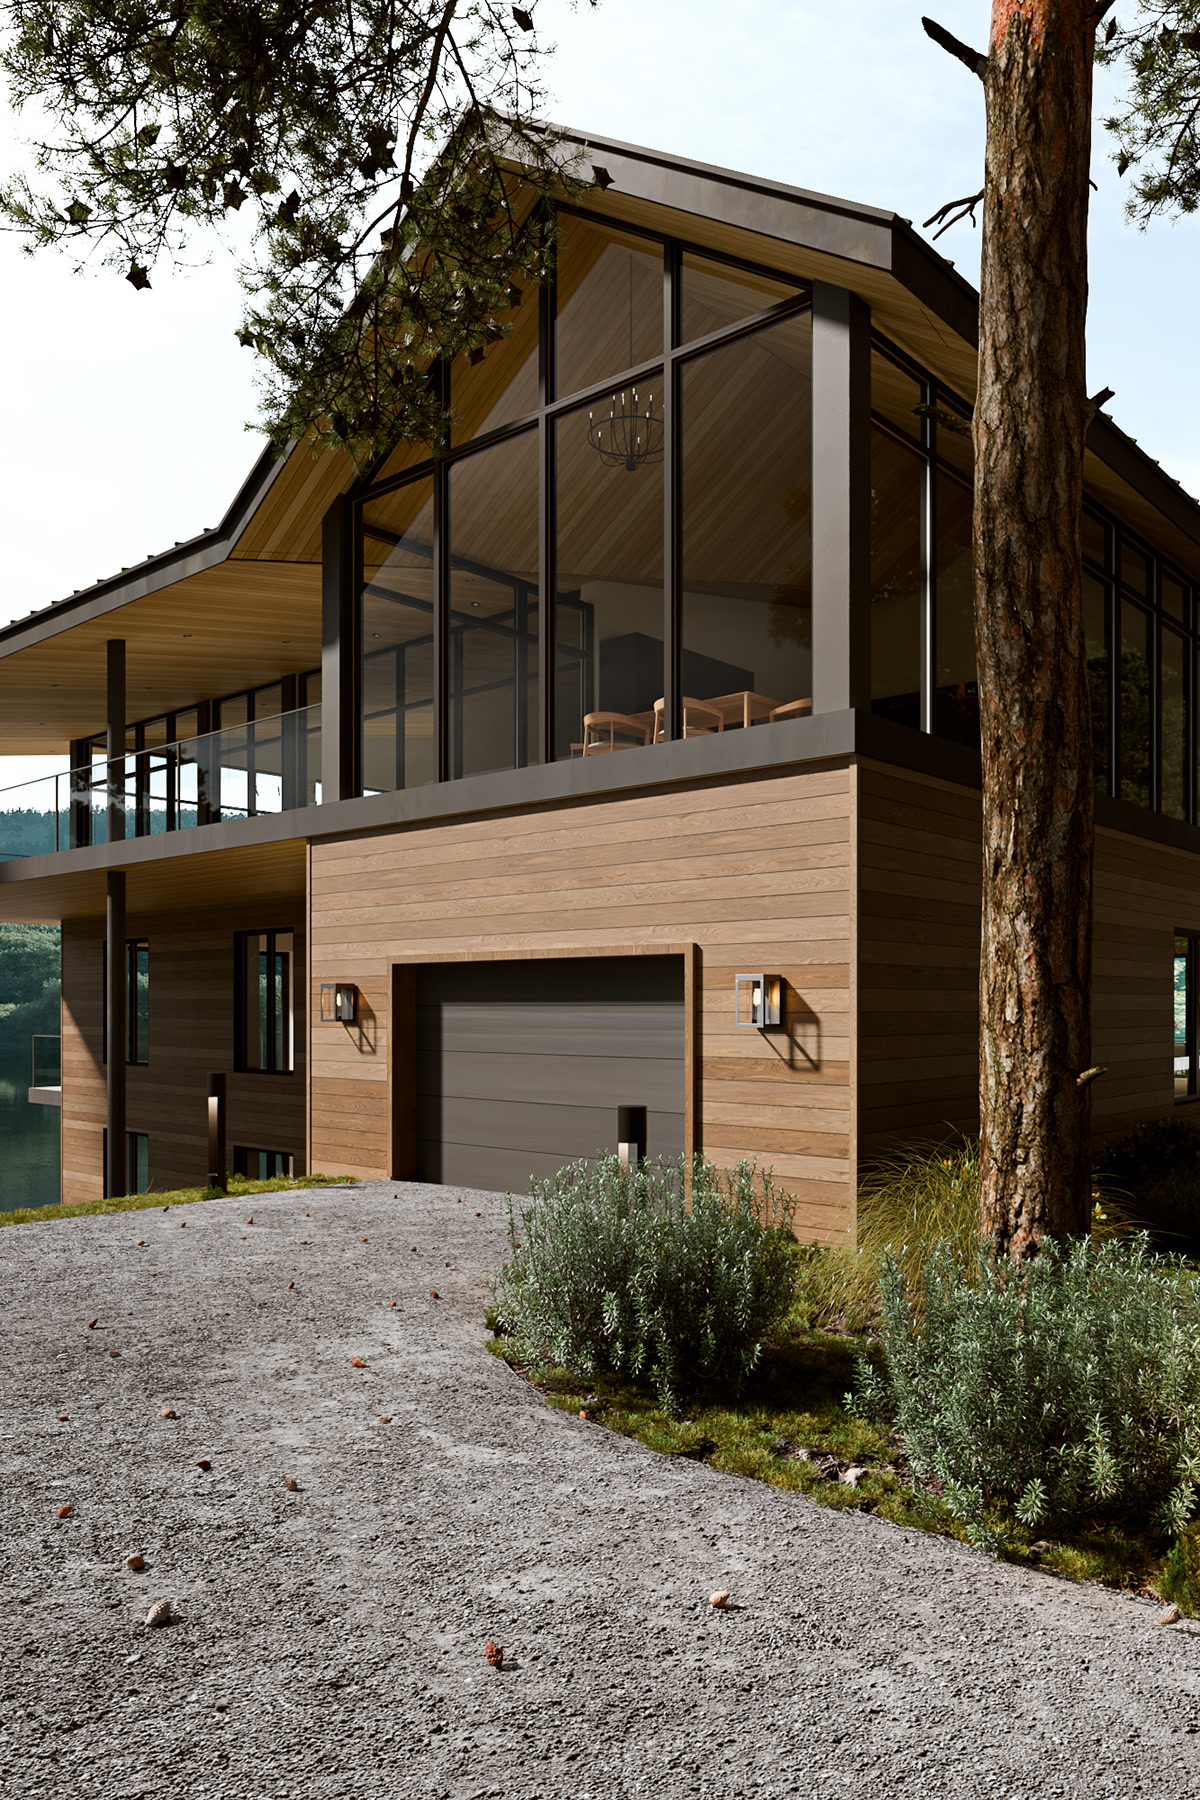 3ds max architecture CGI corona exterior foresthouse lakehouse Landscape pine tree Render